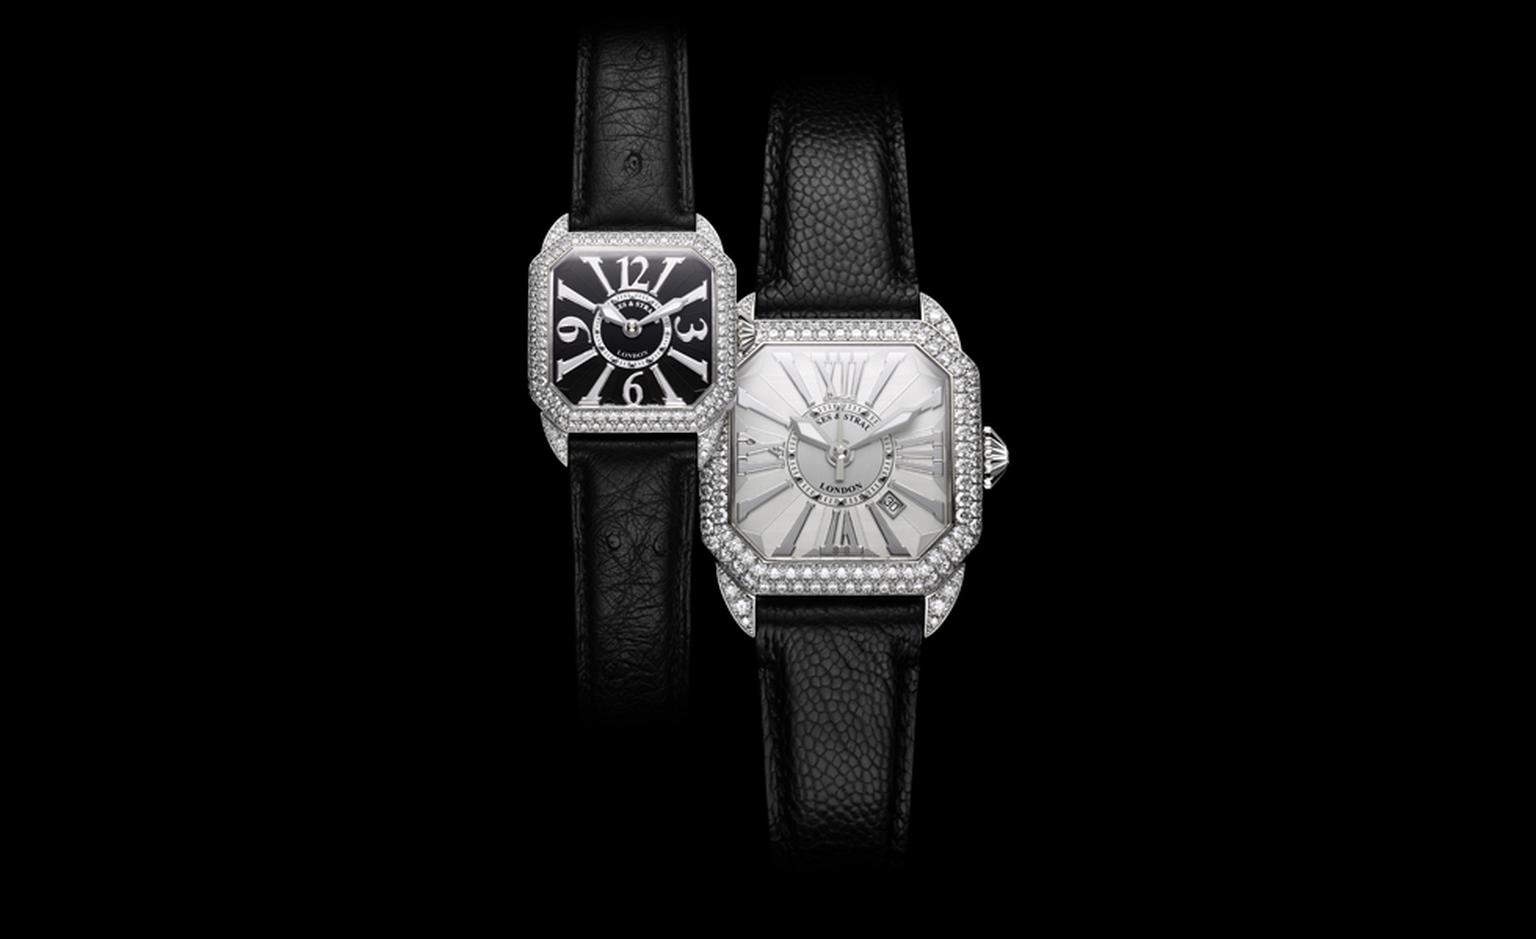 Backes & Strauss, two Berkeley watches in white gold. The black dial model boasts 129 diamonds weighing 1.77 cts. Price £16,130. The larger white dial model has 139 diamonds weighing in at 3.44 carats. Price: £39,005